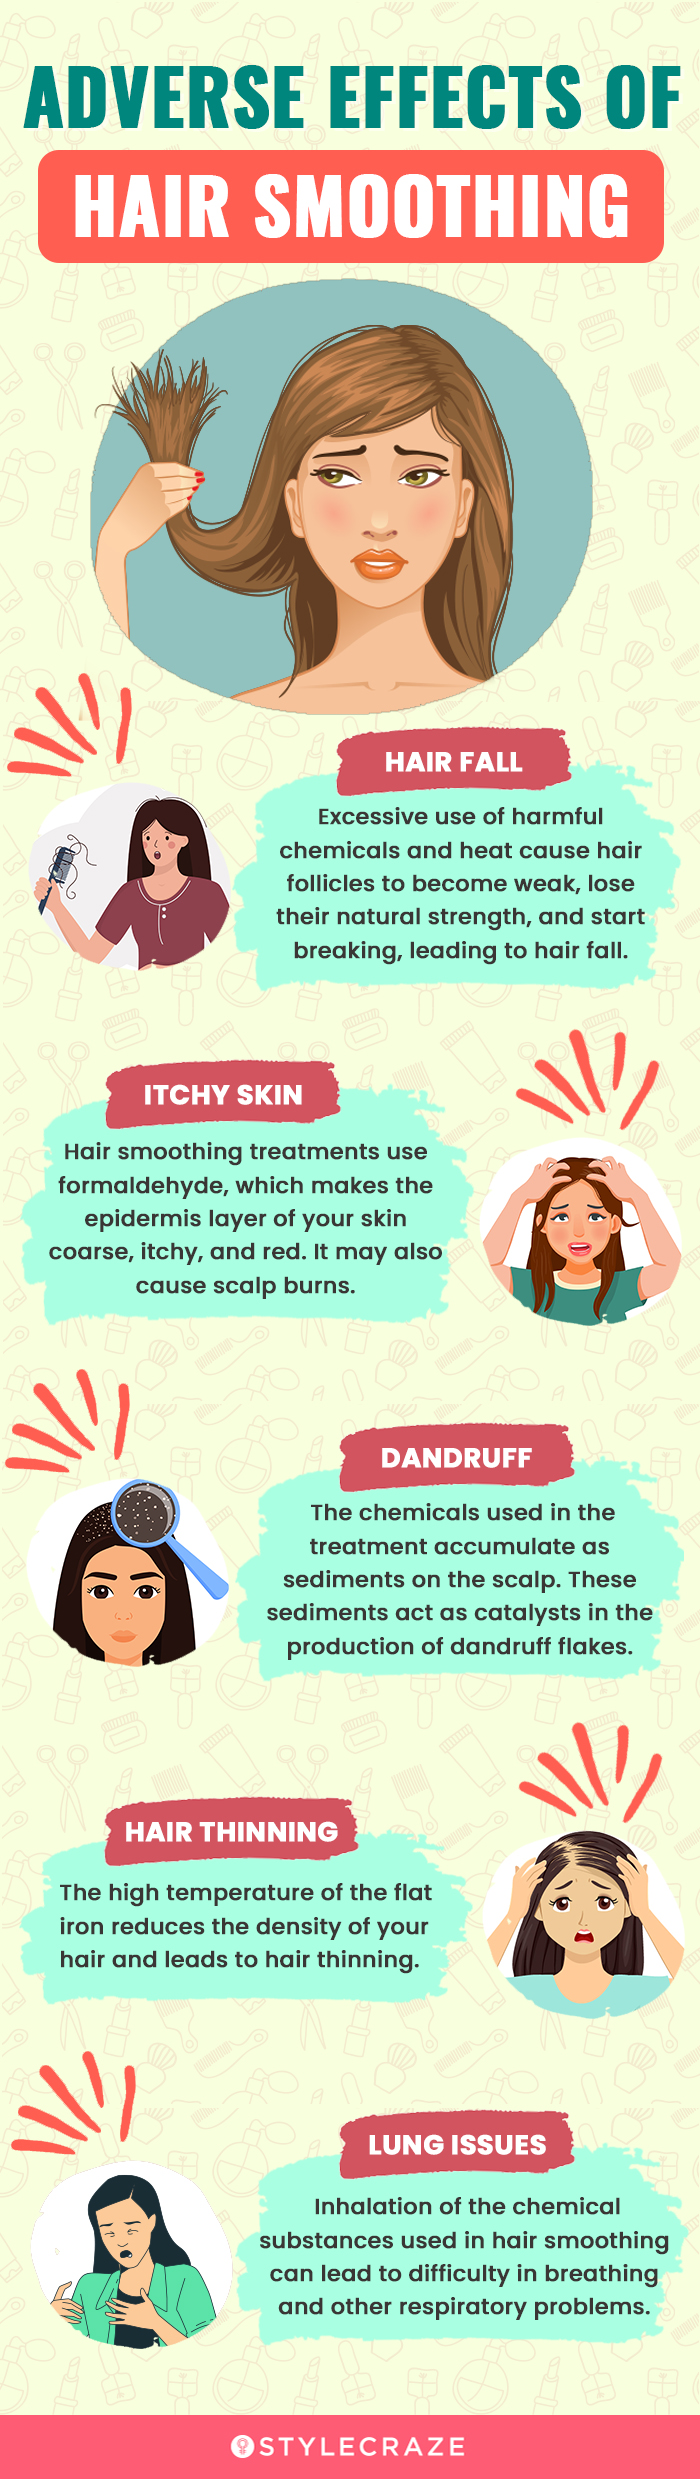 adverse effects of hair smoothing [infographic]